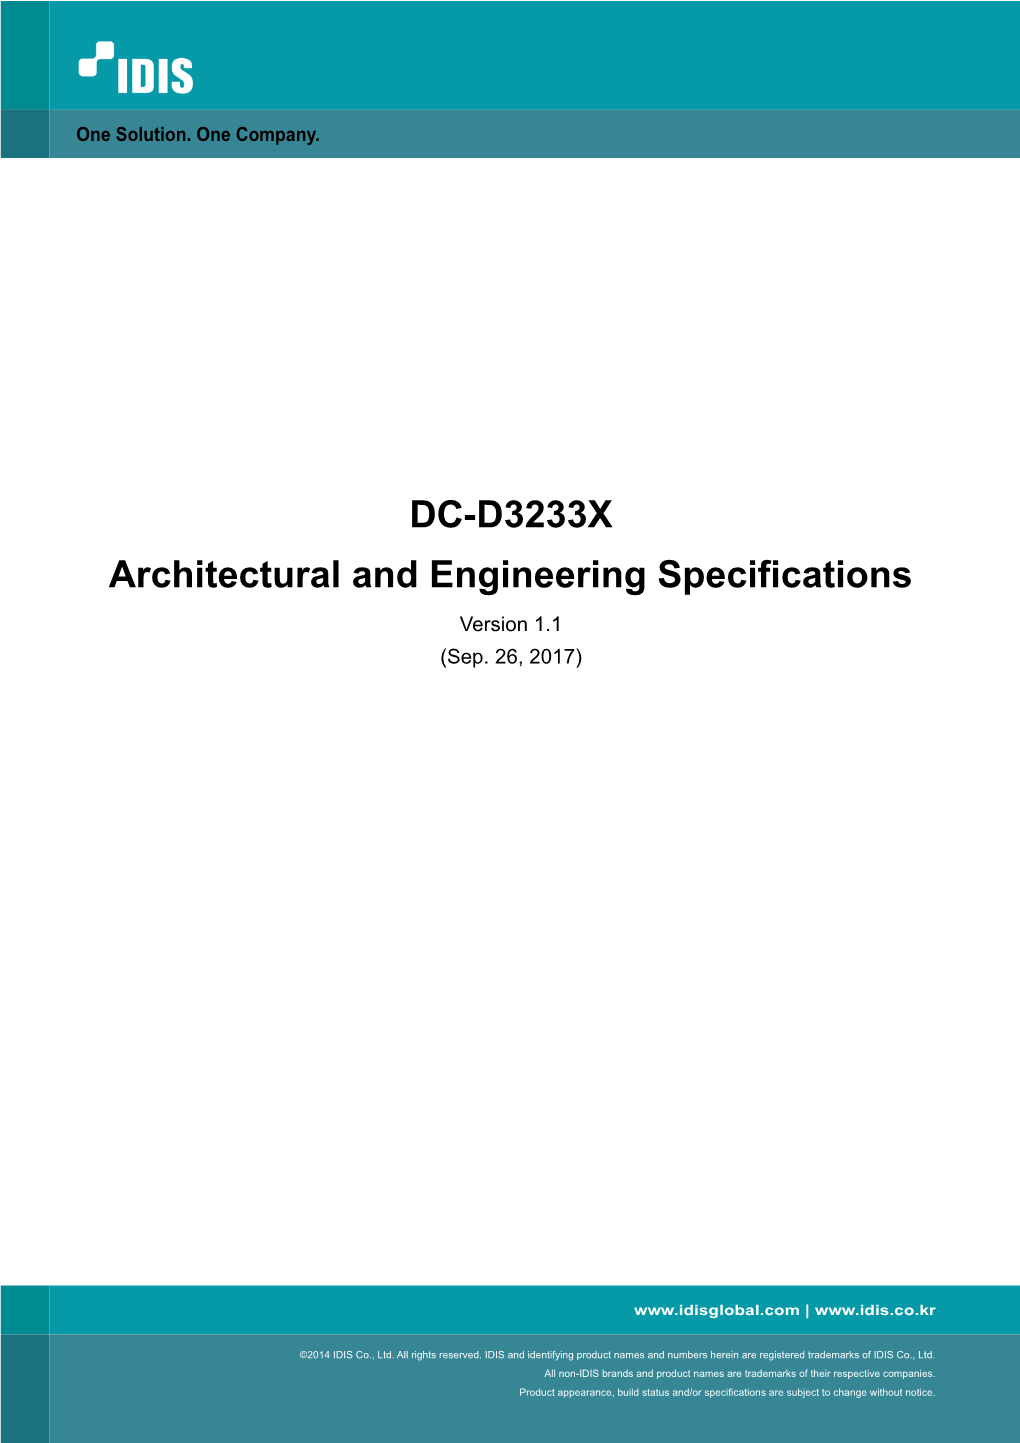 Architectural and Engineering Specifications